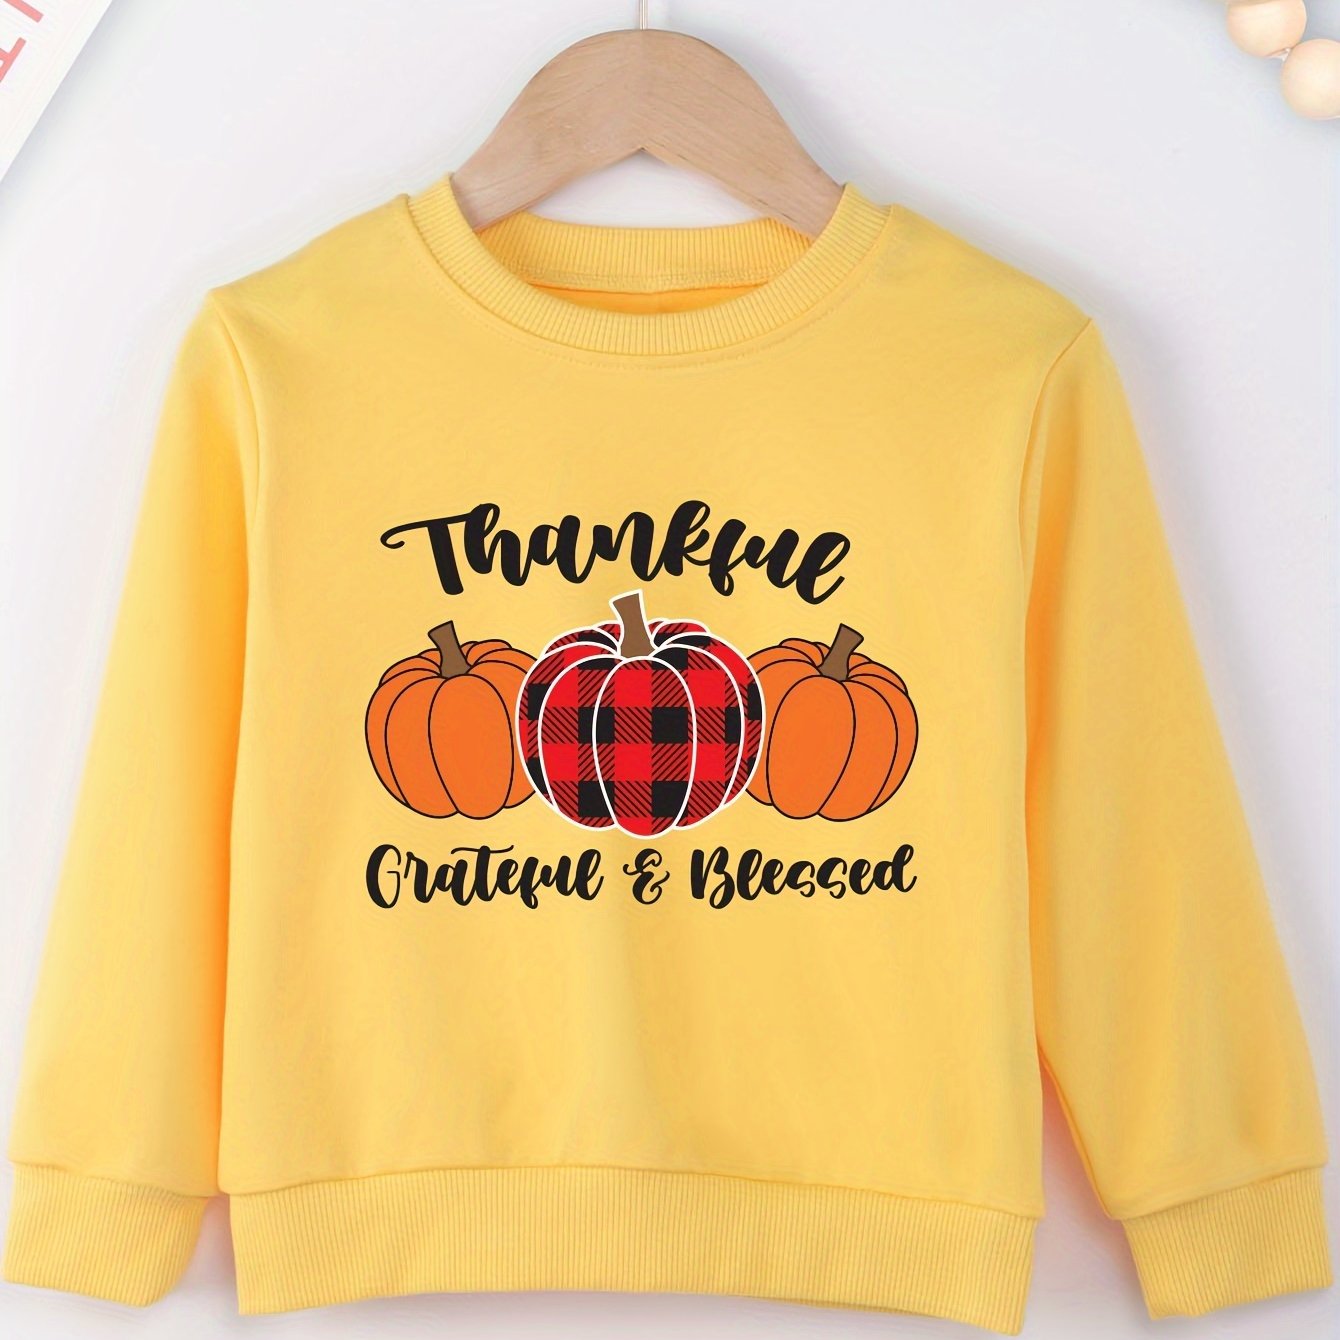 Thankful GRATEFUL&BLESSED (thanksgiving themed) Youth Christian Pullover Sweatshirt claimedbygoddesigns